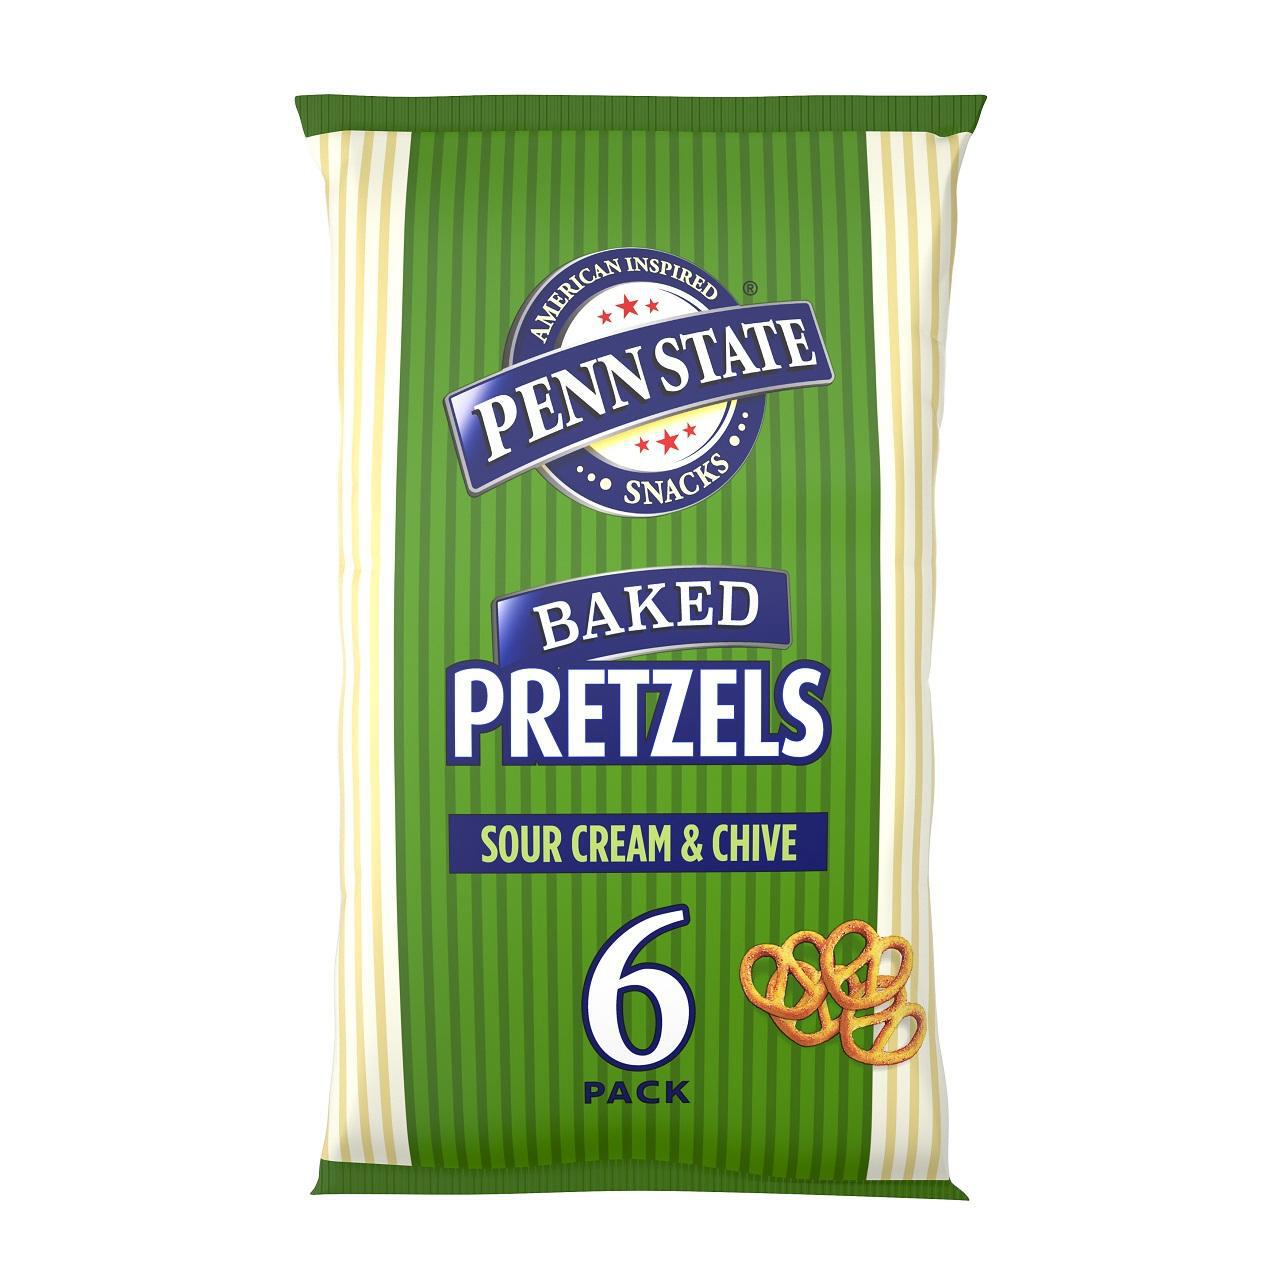 Penn State Sour Cream & Chive Multipack Pretzels 6 Pack 6 x 22g